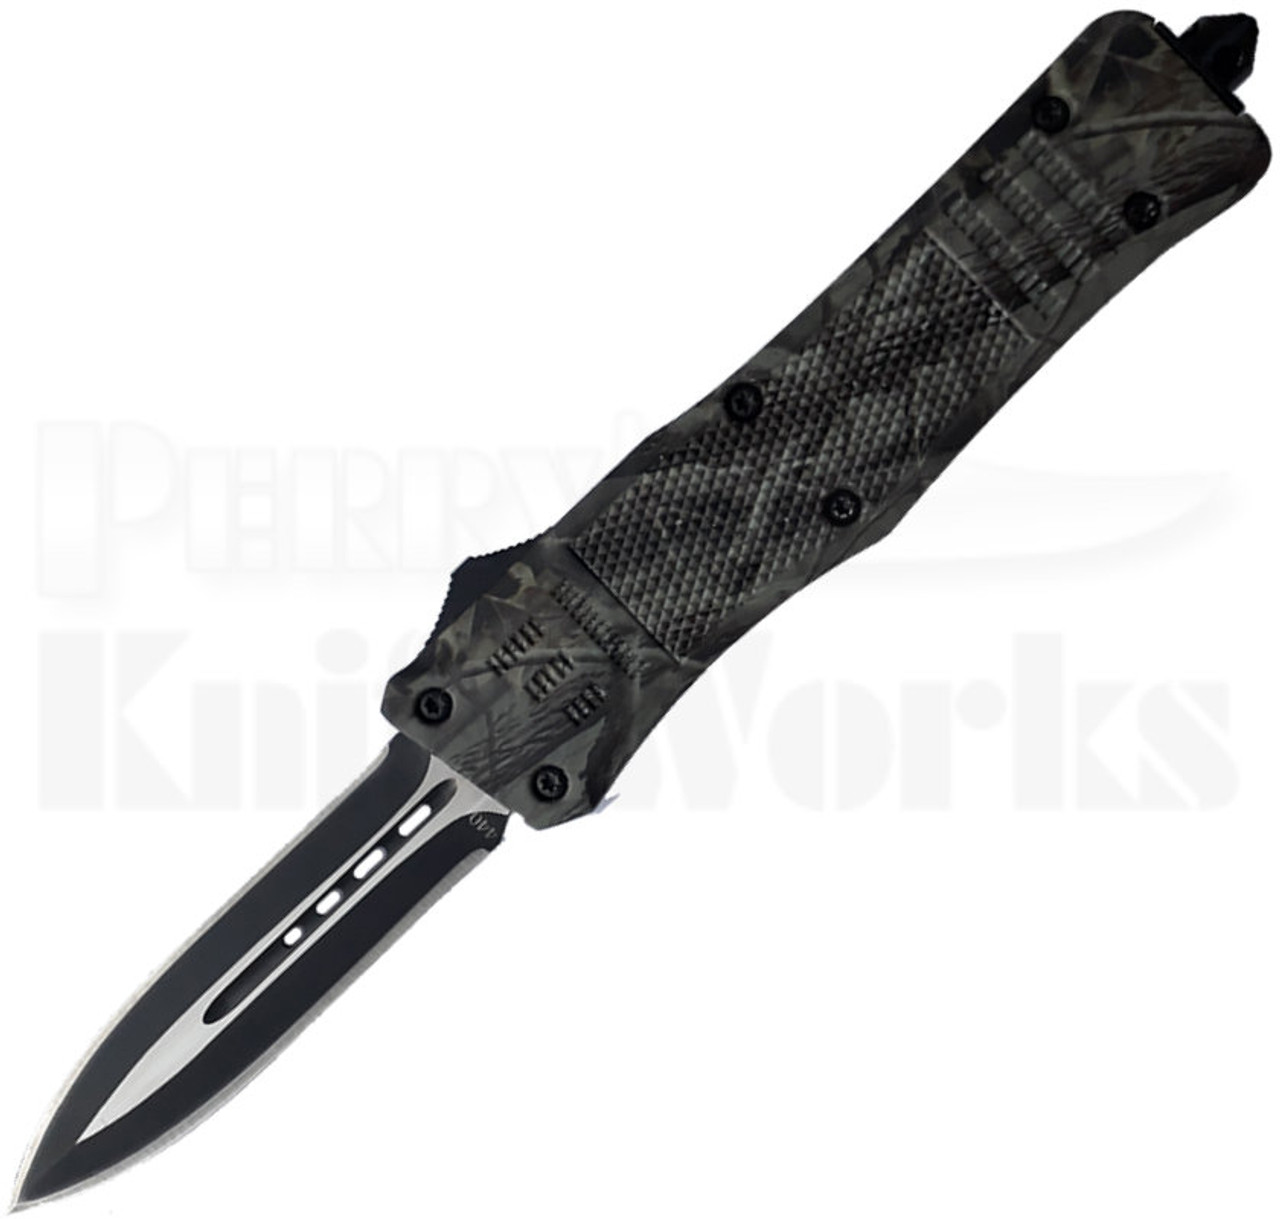 Cutting Edge Heretic Woodland Camo D/A OTF Knife Spear Point 